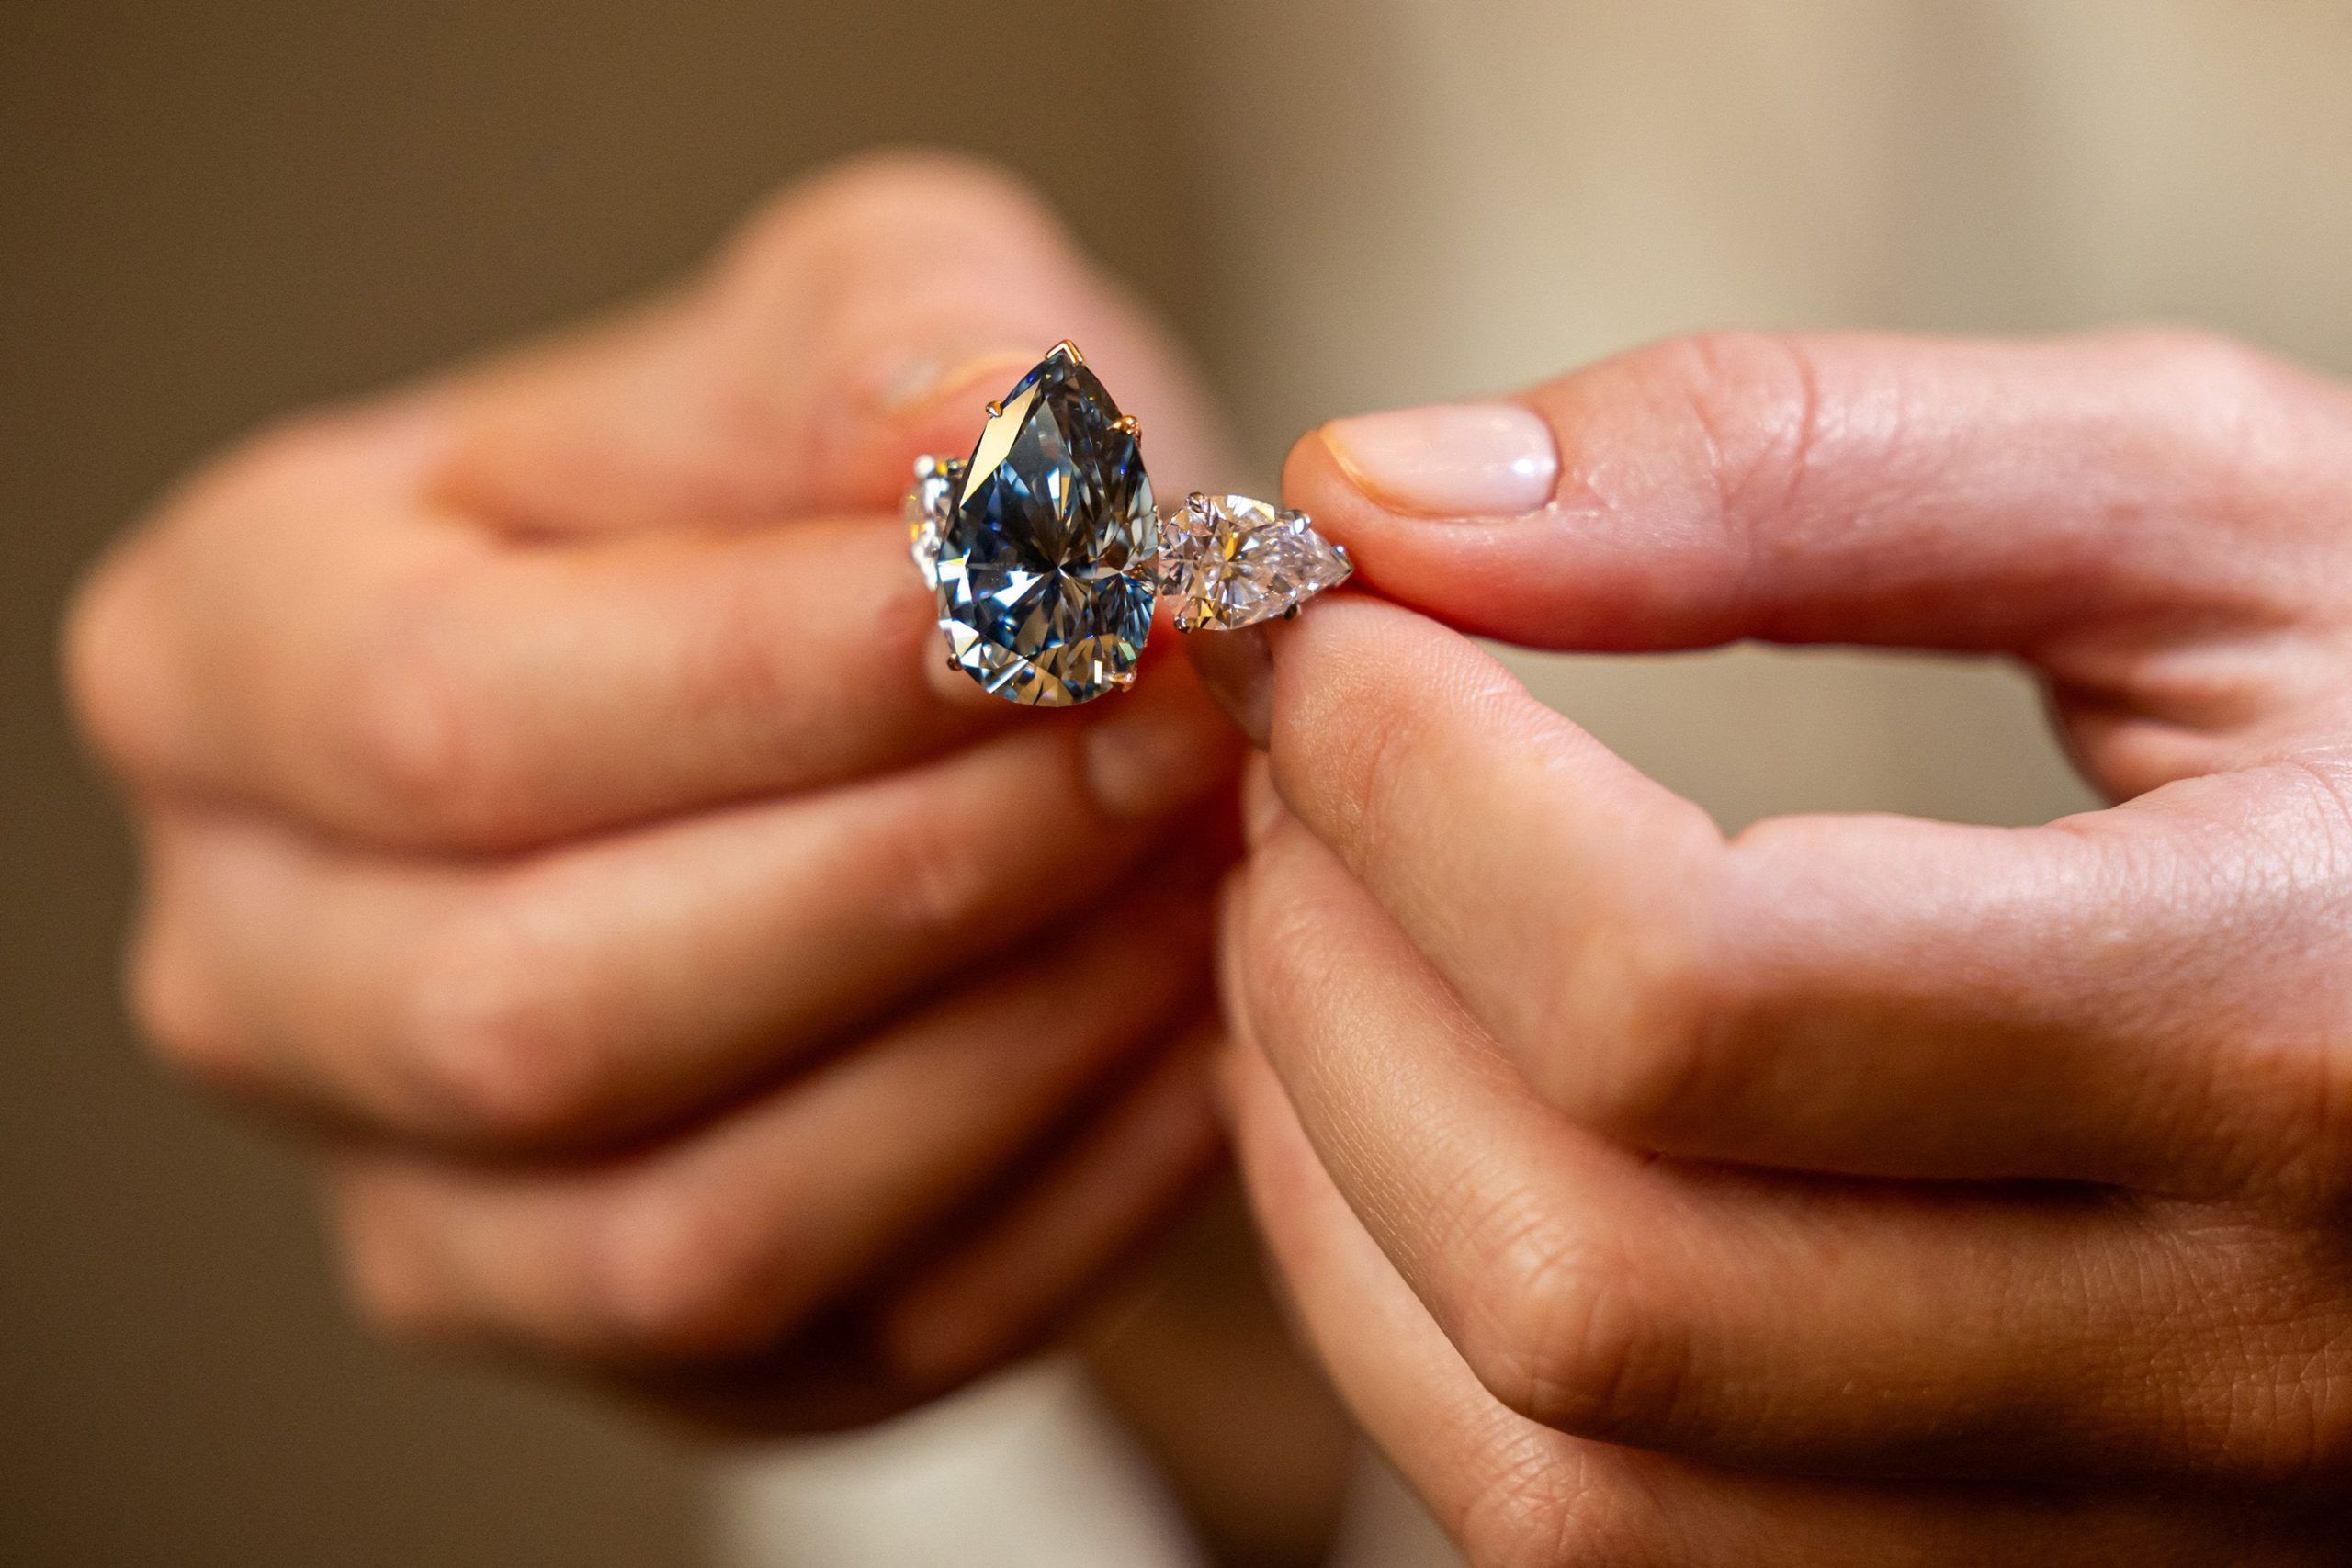 Bleu Royal Becomes One of the Most Expensive Diamonds Ever Sold